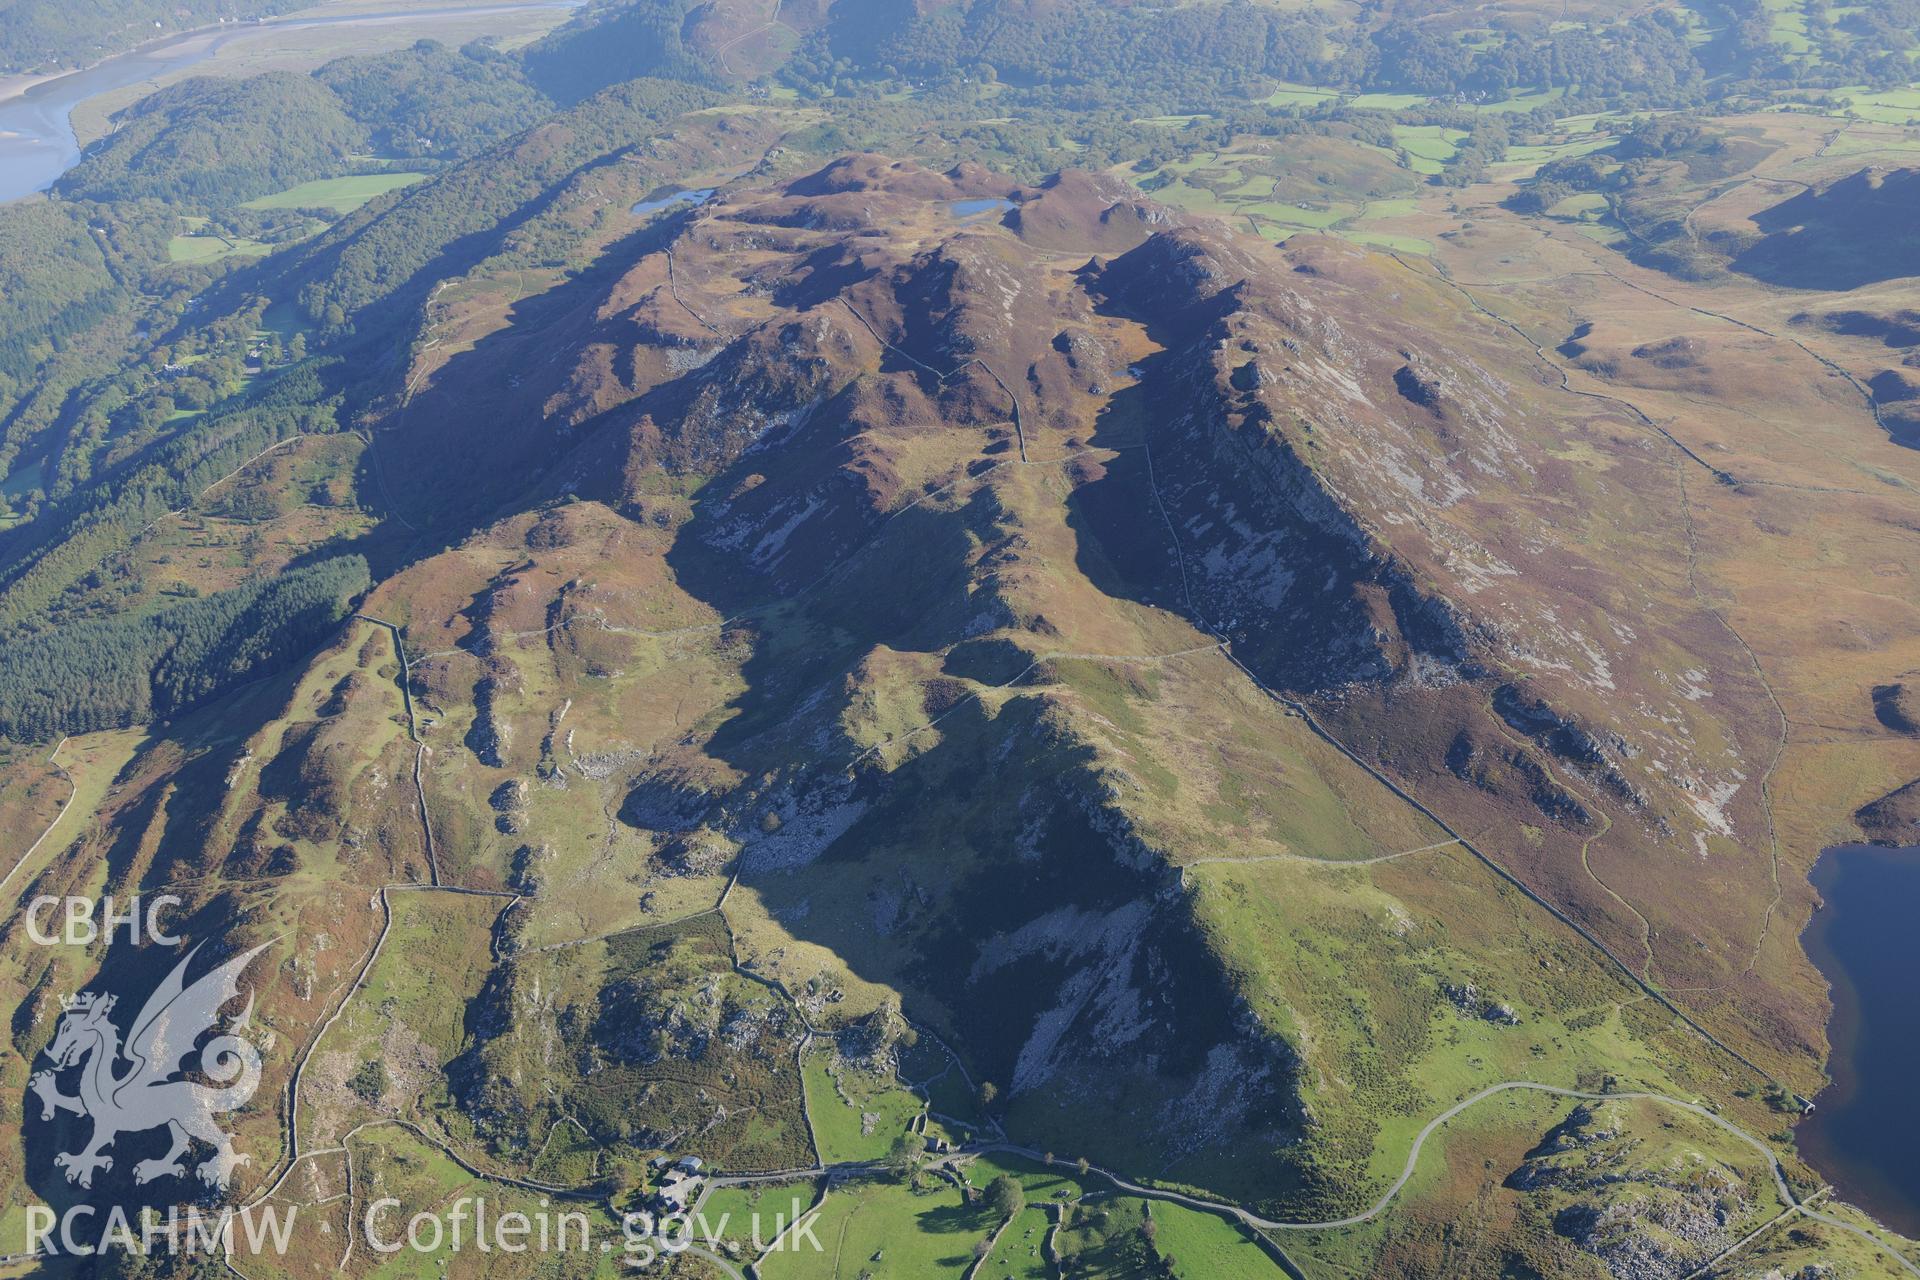 Pared y Cefnhir hillfort, about halfway between Dolgellau and Fairbourne. Oblique aerial photograph taken during the Royal Commission's programme of archaeological aerial reconnaissance by Toby Driver on 2nd October 2015.